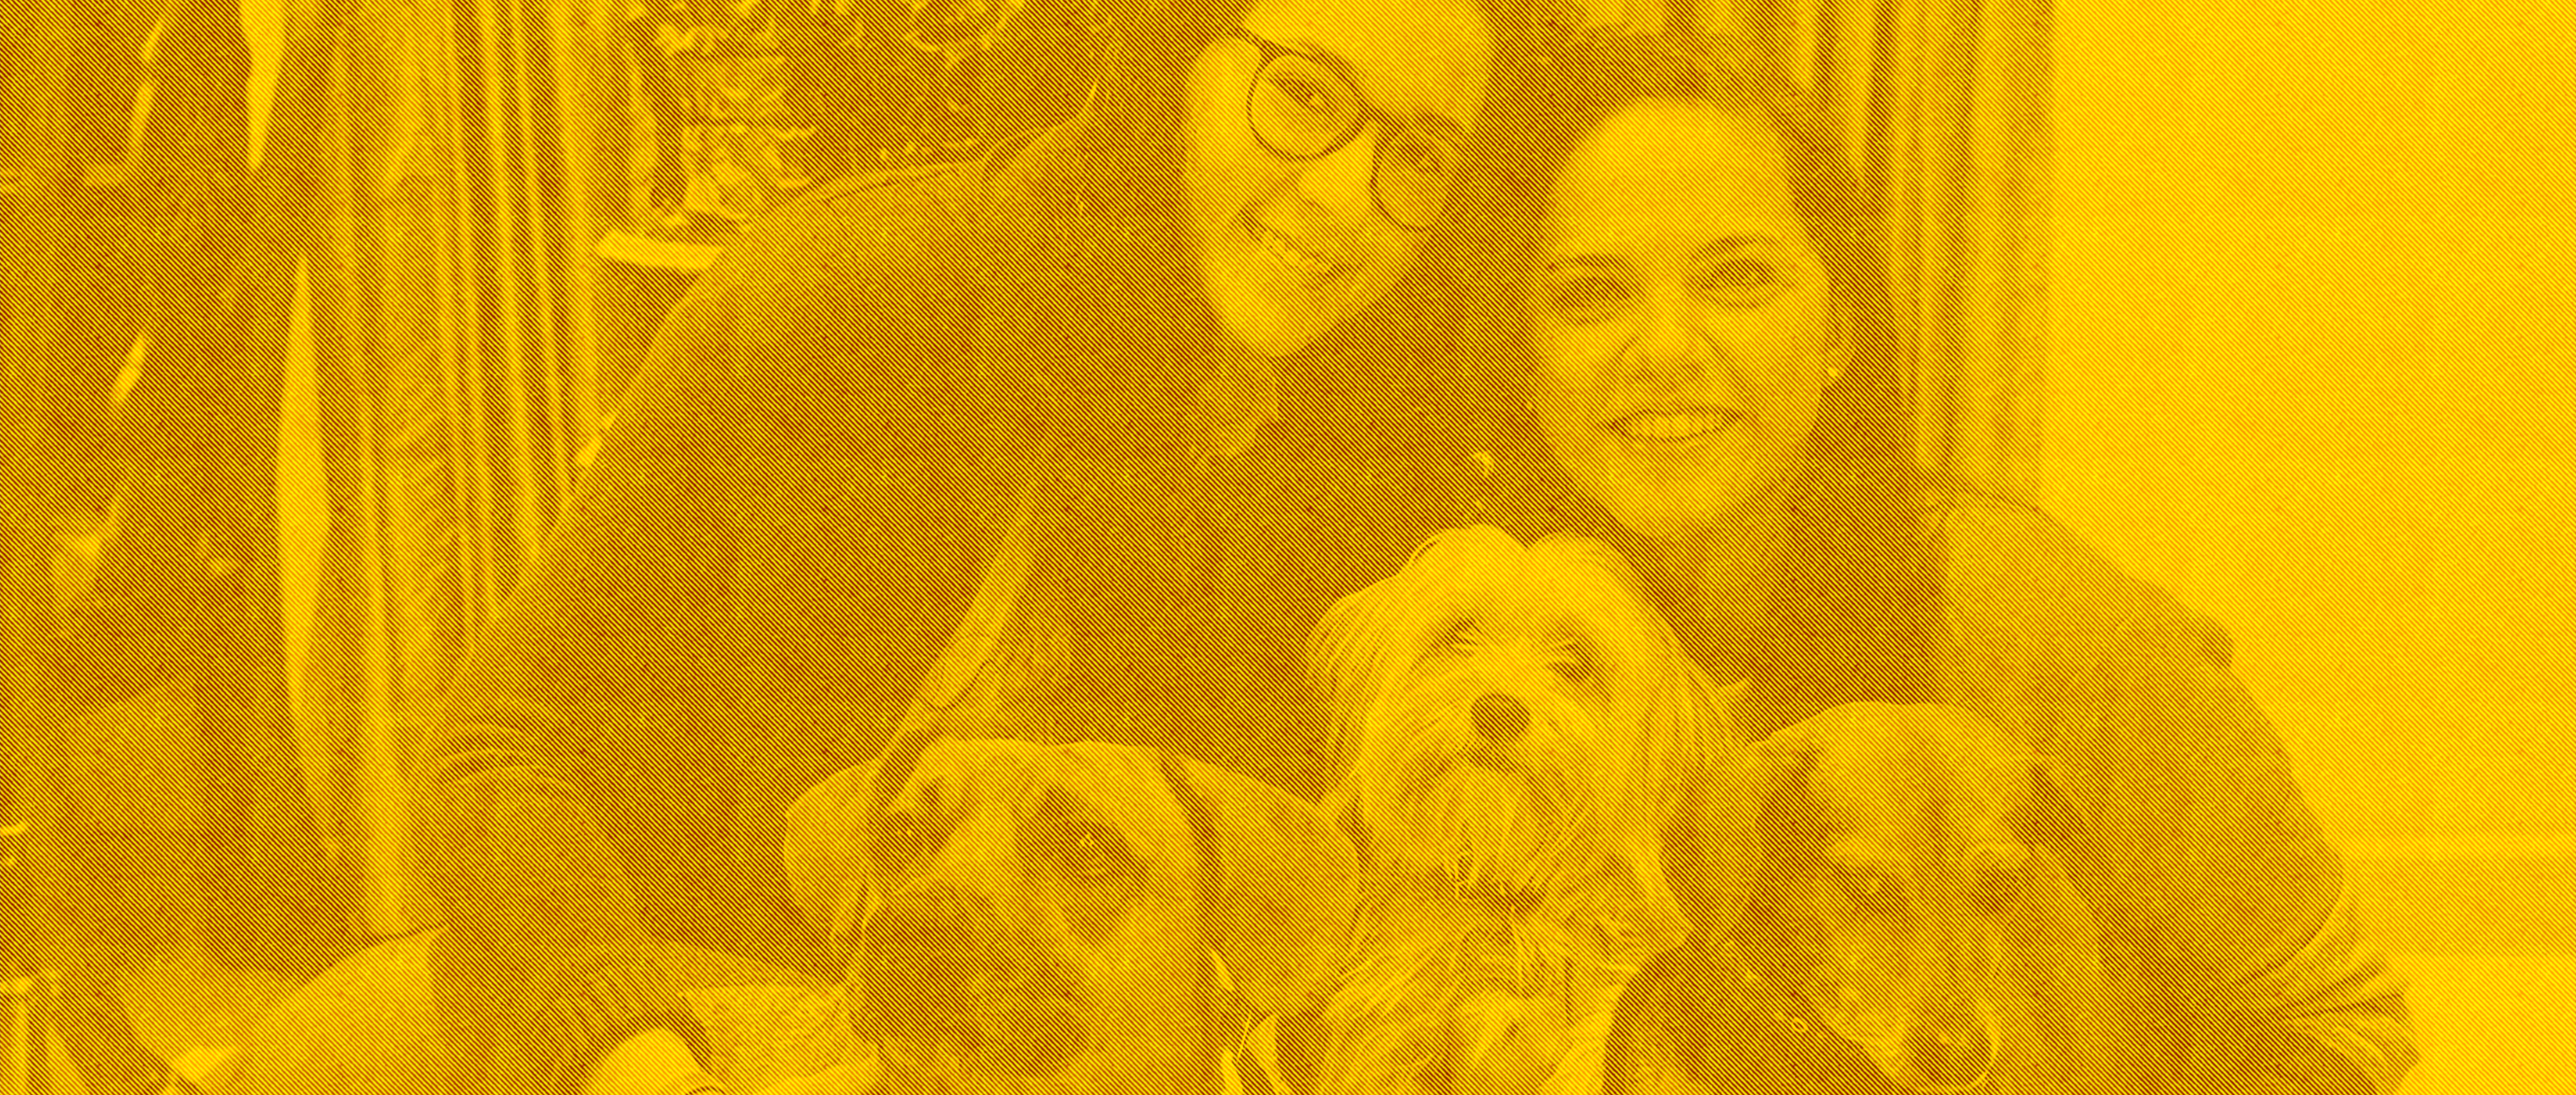 Two women pose with three dogs